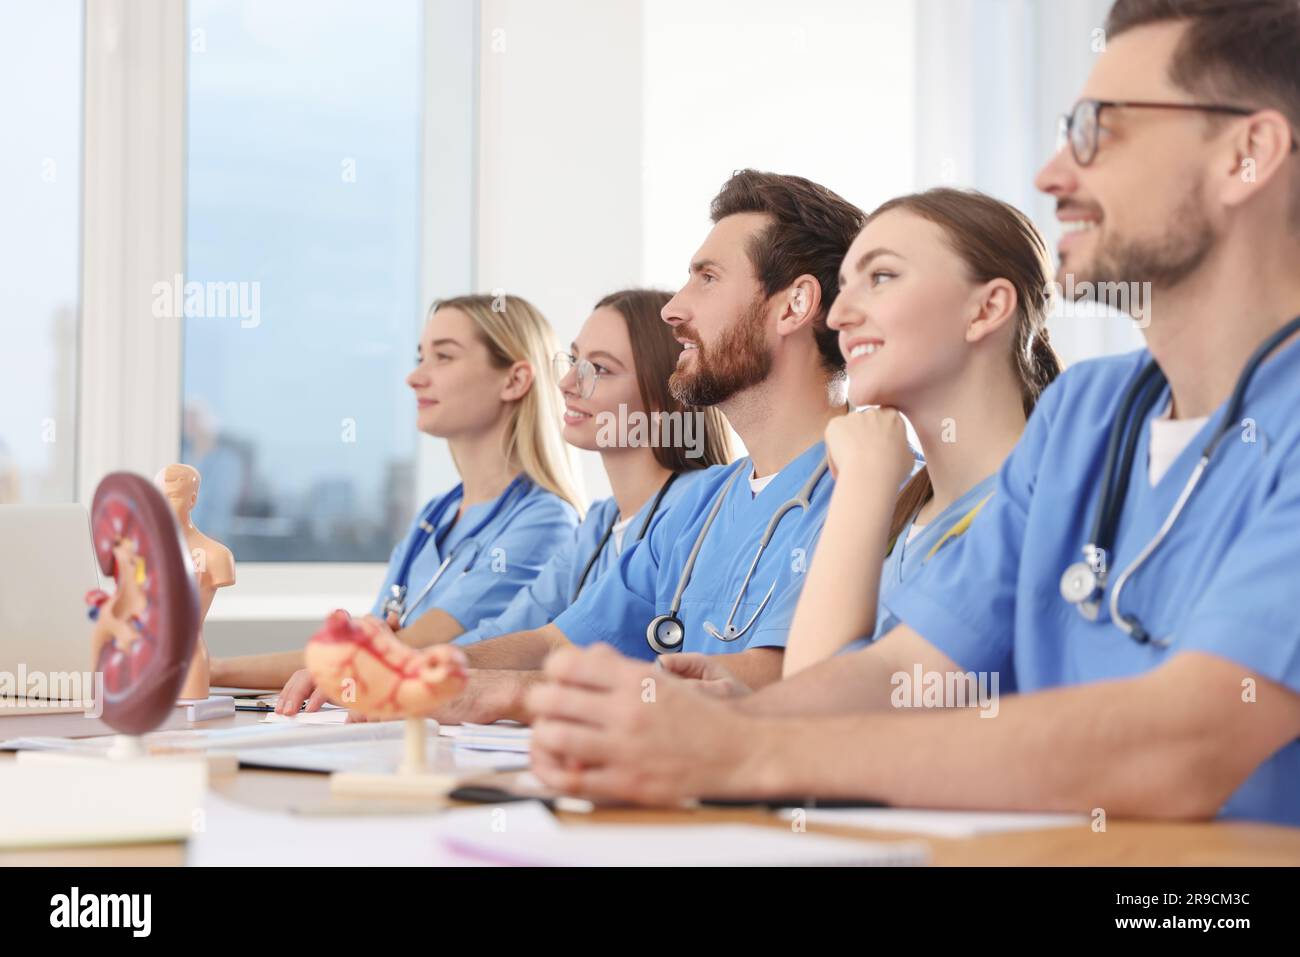 Medical students in uniforms studying at university Stock Photo